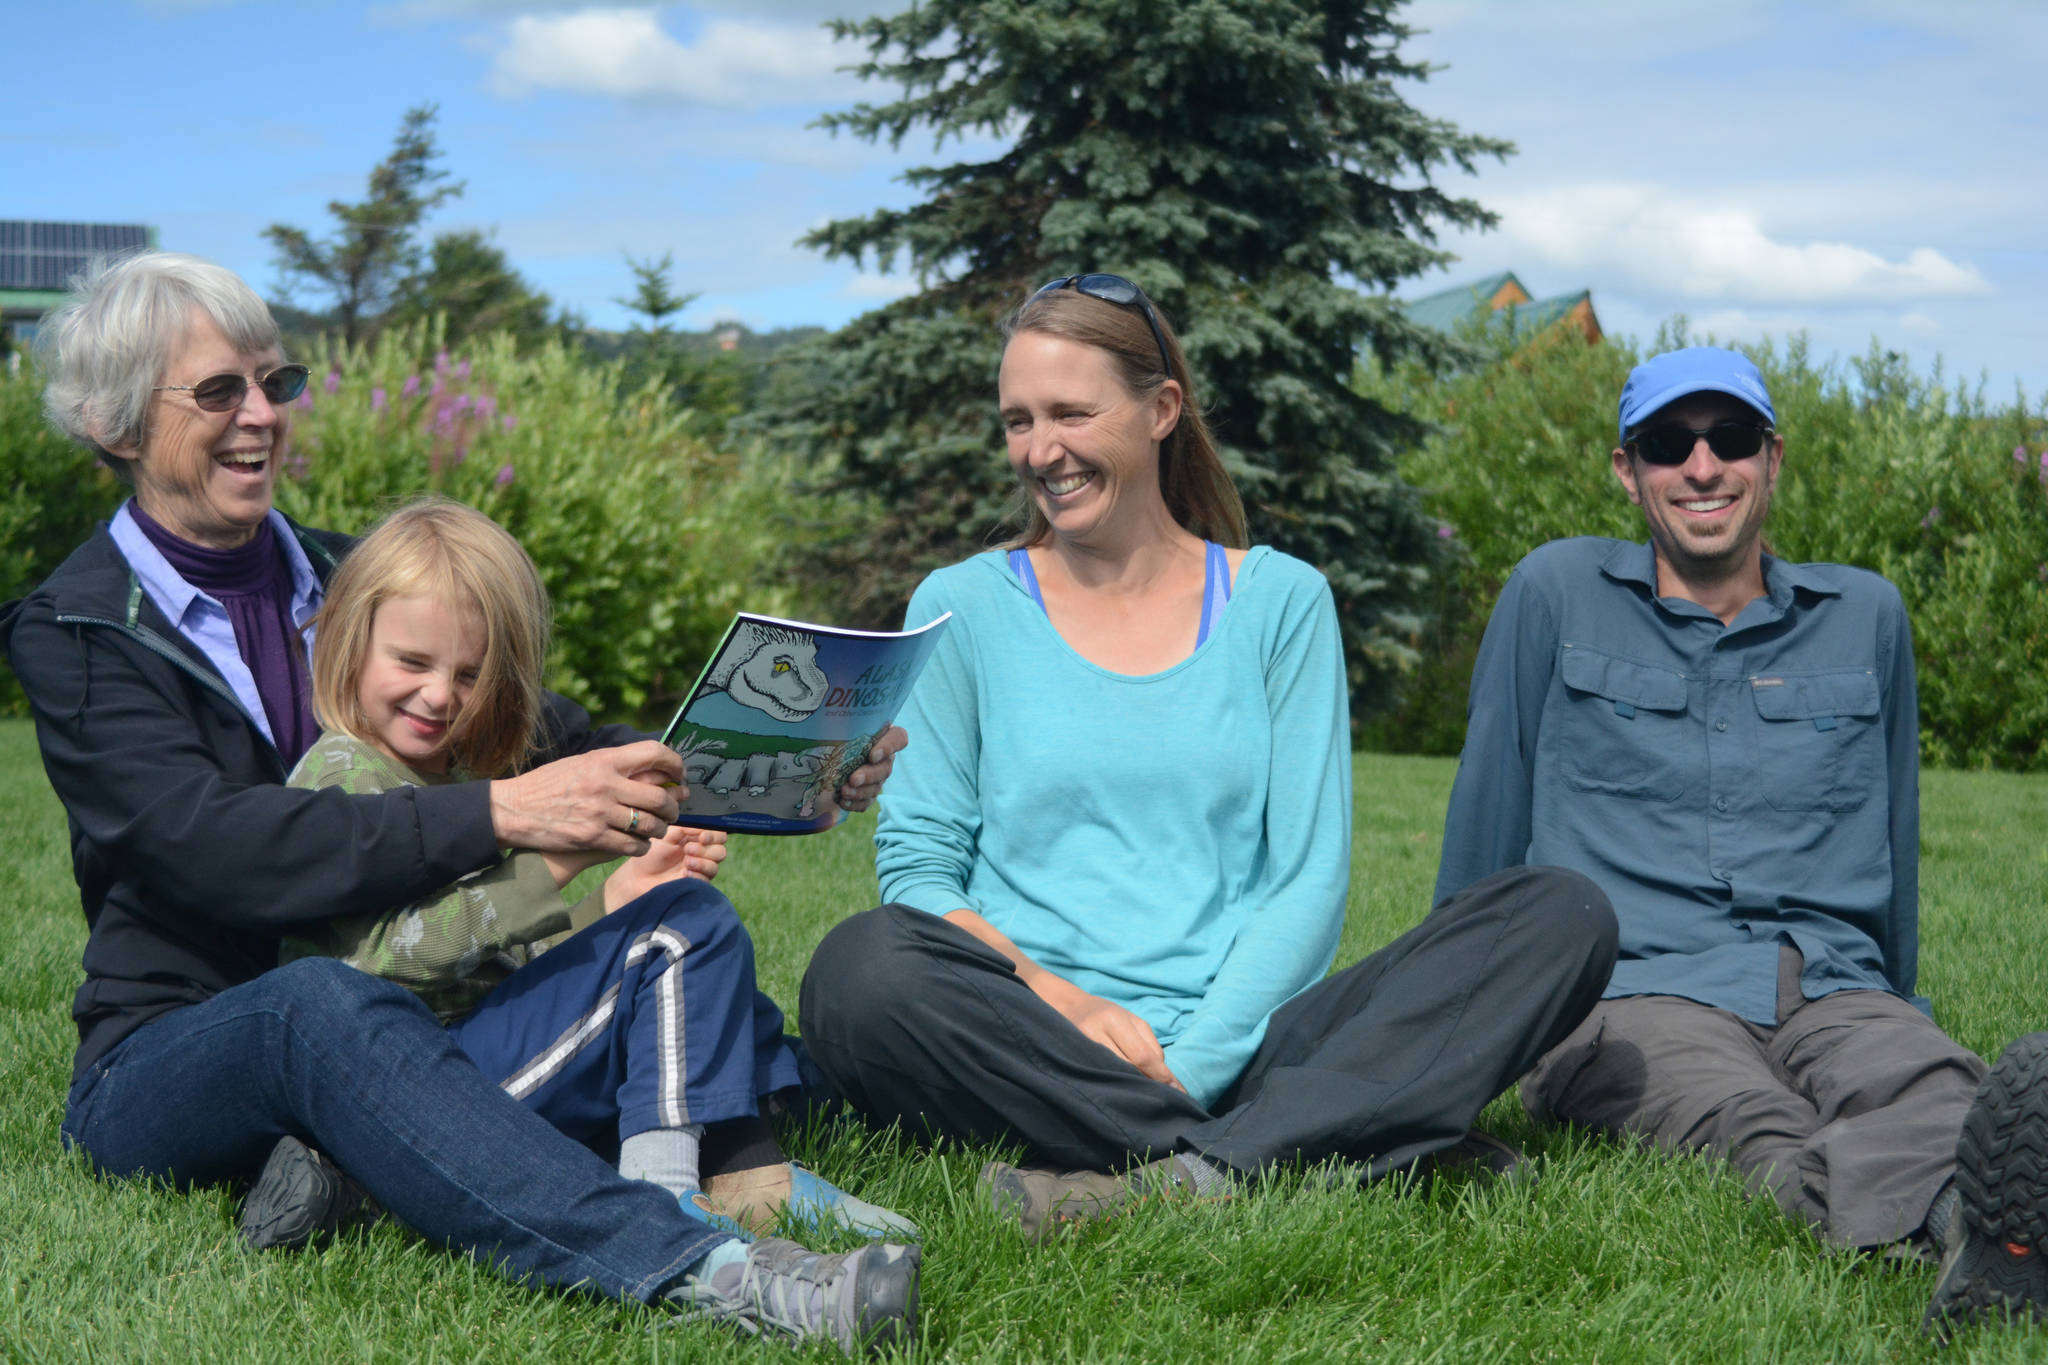 Janet Klein, left, holds her grandson, Sylas Reising, 4, while she visits with her daughter, Deborah Klein, center, and son-in-law George Reising, right, at Bishop’s Beach, Homer, Alaska, on Aug. 9, 2018. Not shown is Kai Reising, 6. Silas and Kai were the inspiration for the Klein’s “color and learn” book, “Alaska’s Dinosaurs and Other Cretaceous Creatures.” (Homer News file photo)